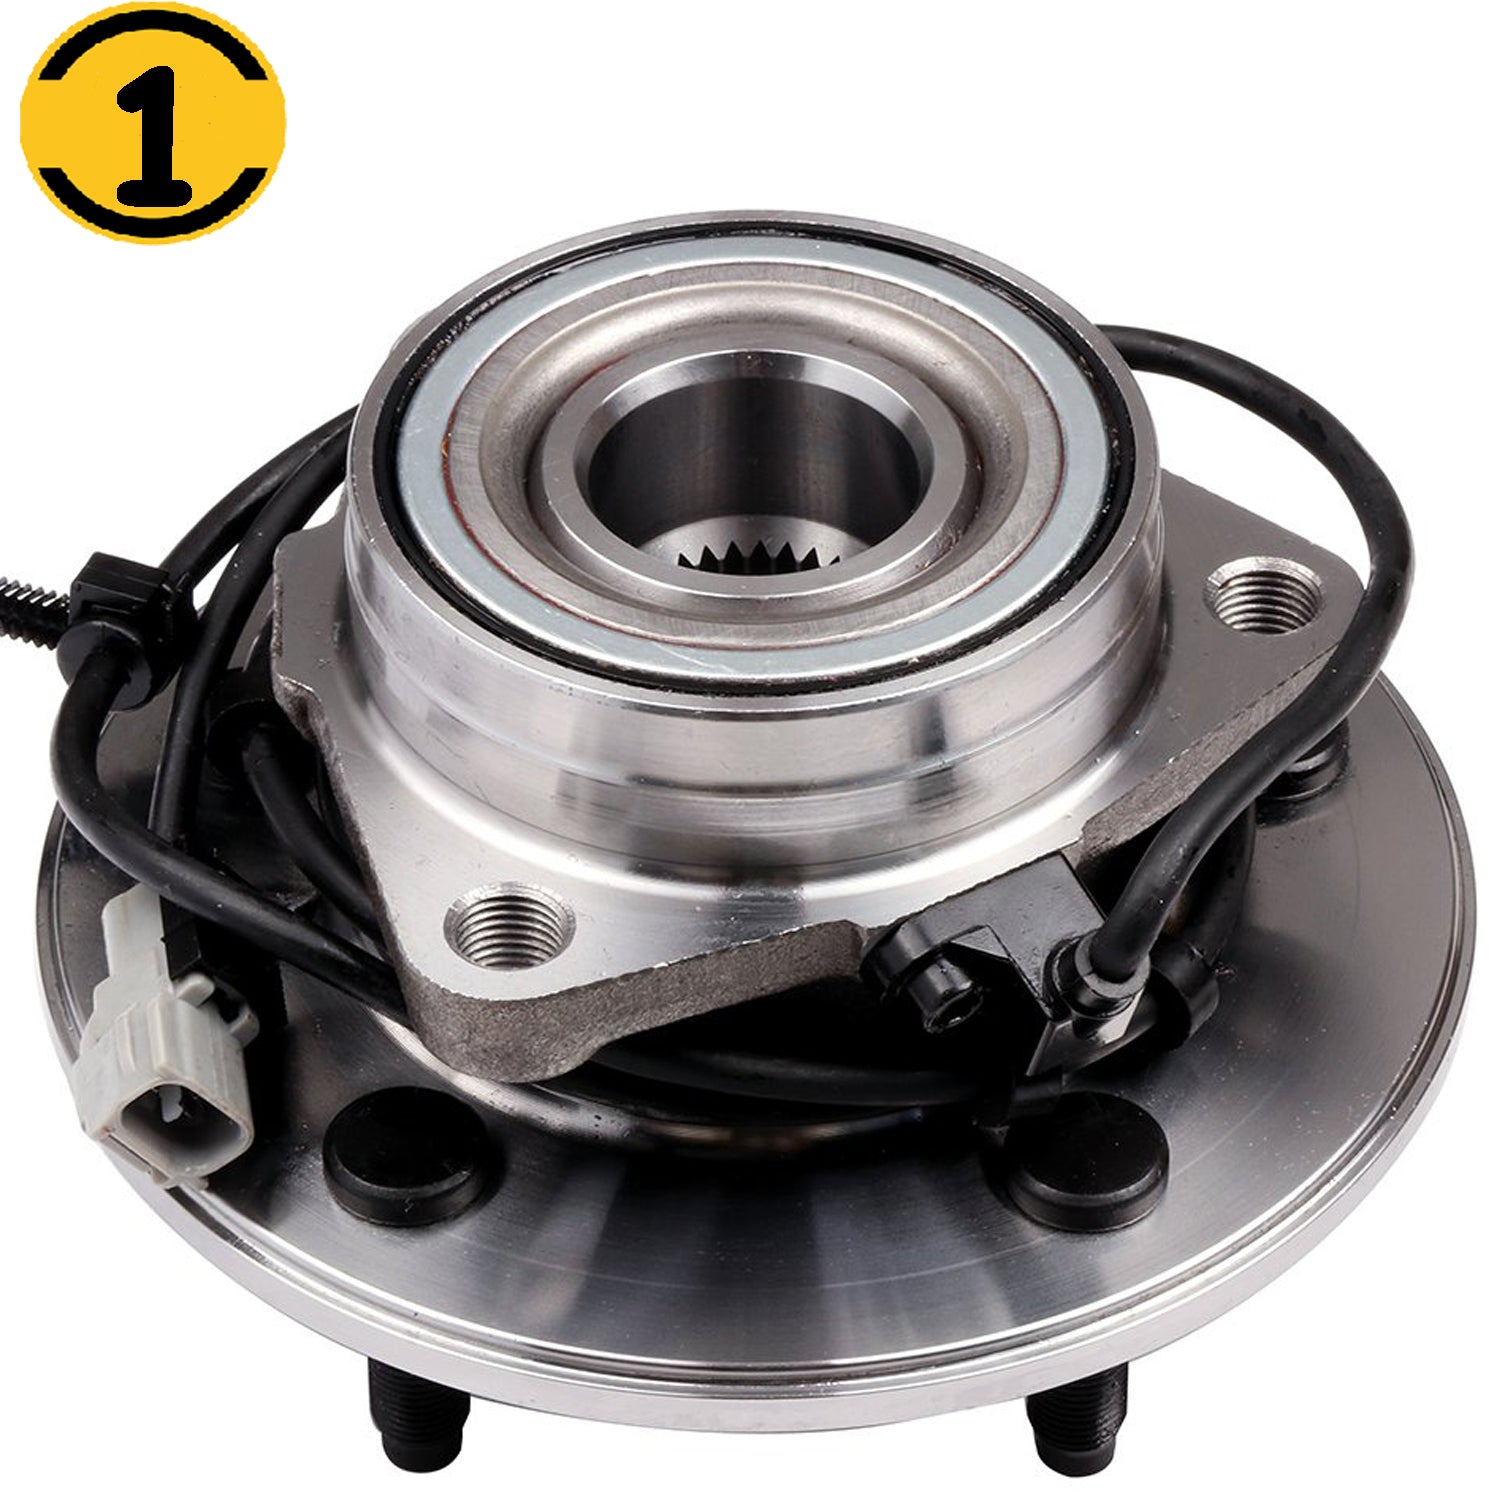 MotorbyMotor 515039 Front Wheel Bearing and Hub Assembly 4WD with 5 Lugs Fits for 2000 2001 Dodge Ram 1500 Pickup Low-Runout OE Directly Replacement Hub Bearing (4x4, w/ABS) MotorbyMotor